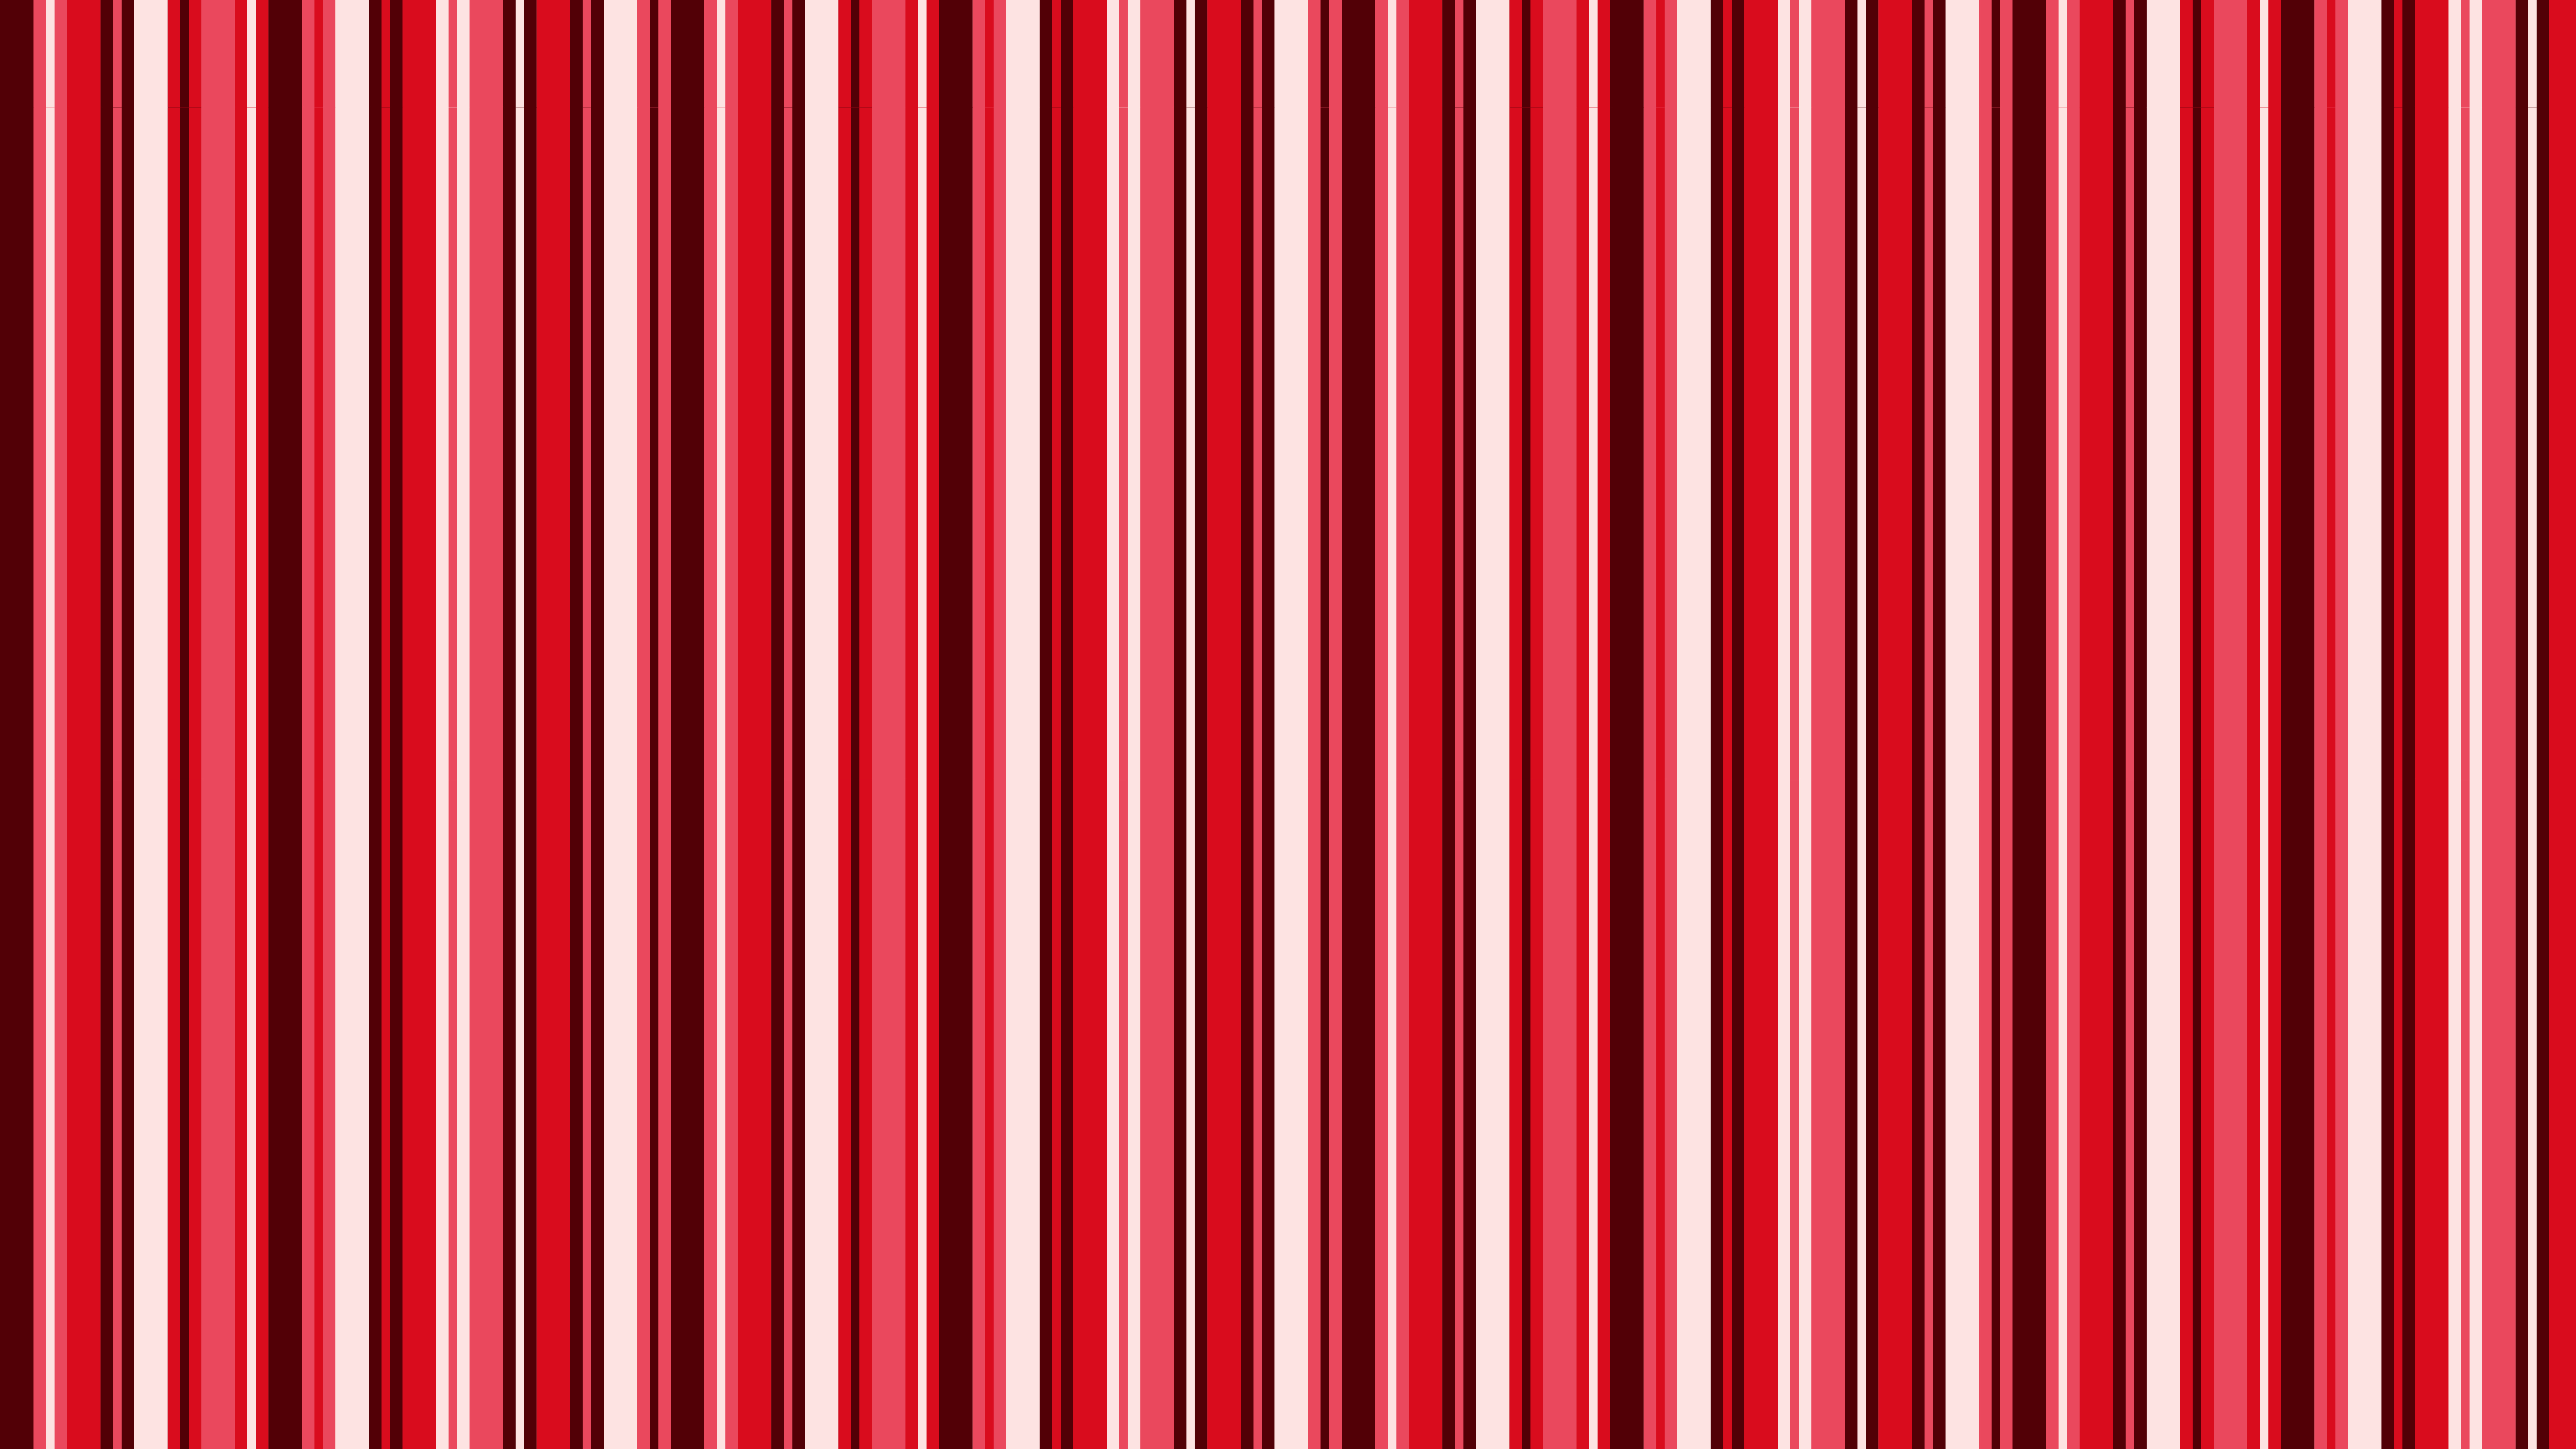 Red and White Stripes, Stripe Patterns, Striped Patterns